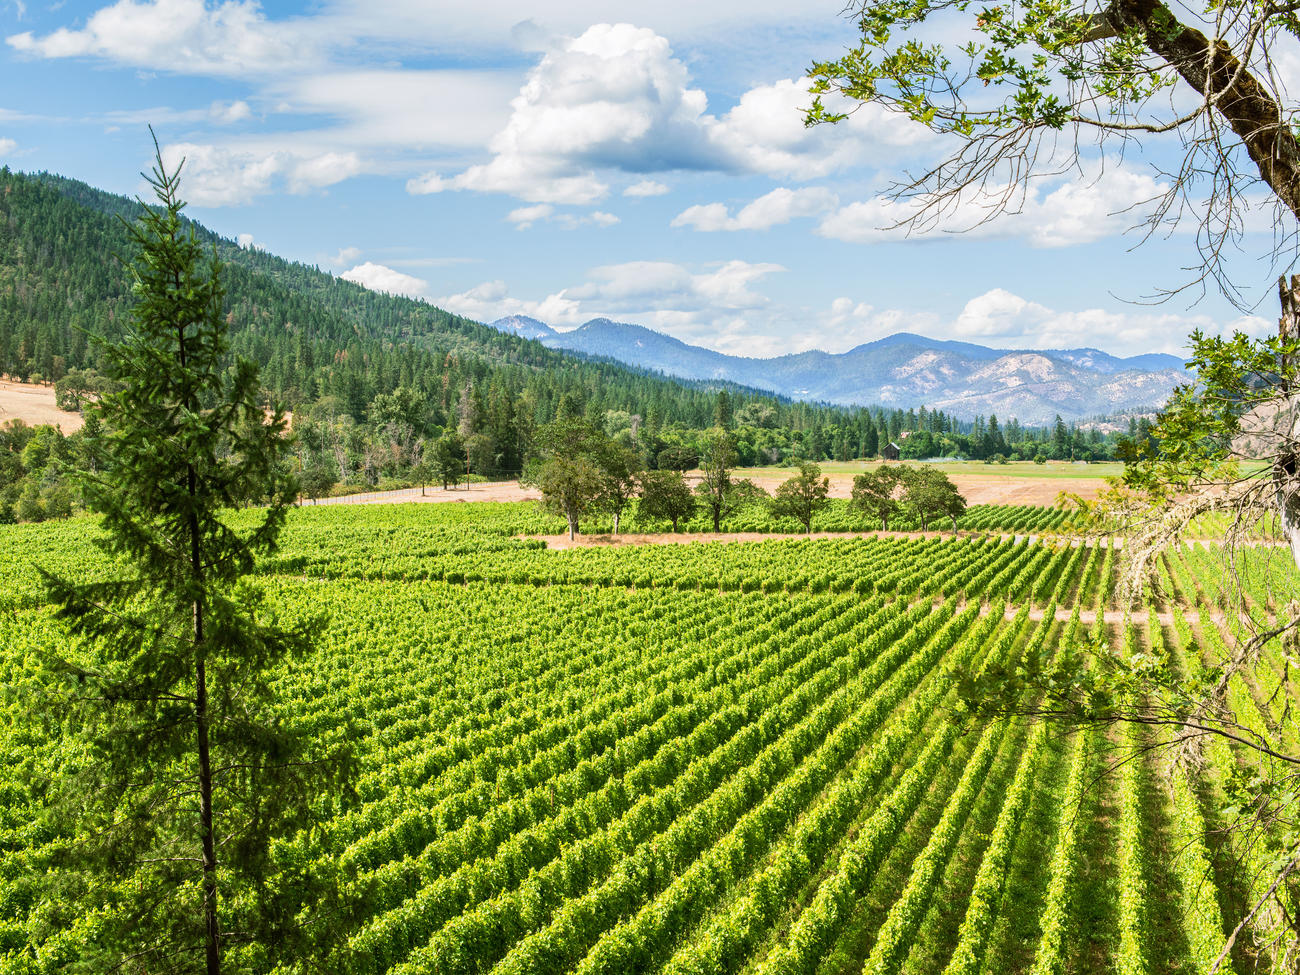 Local’s Guide to Southern Oregon Wine Country